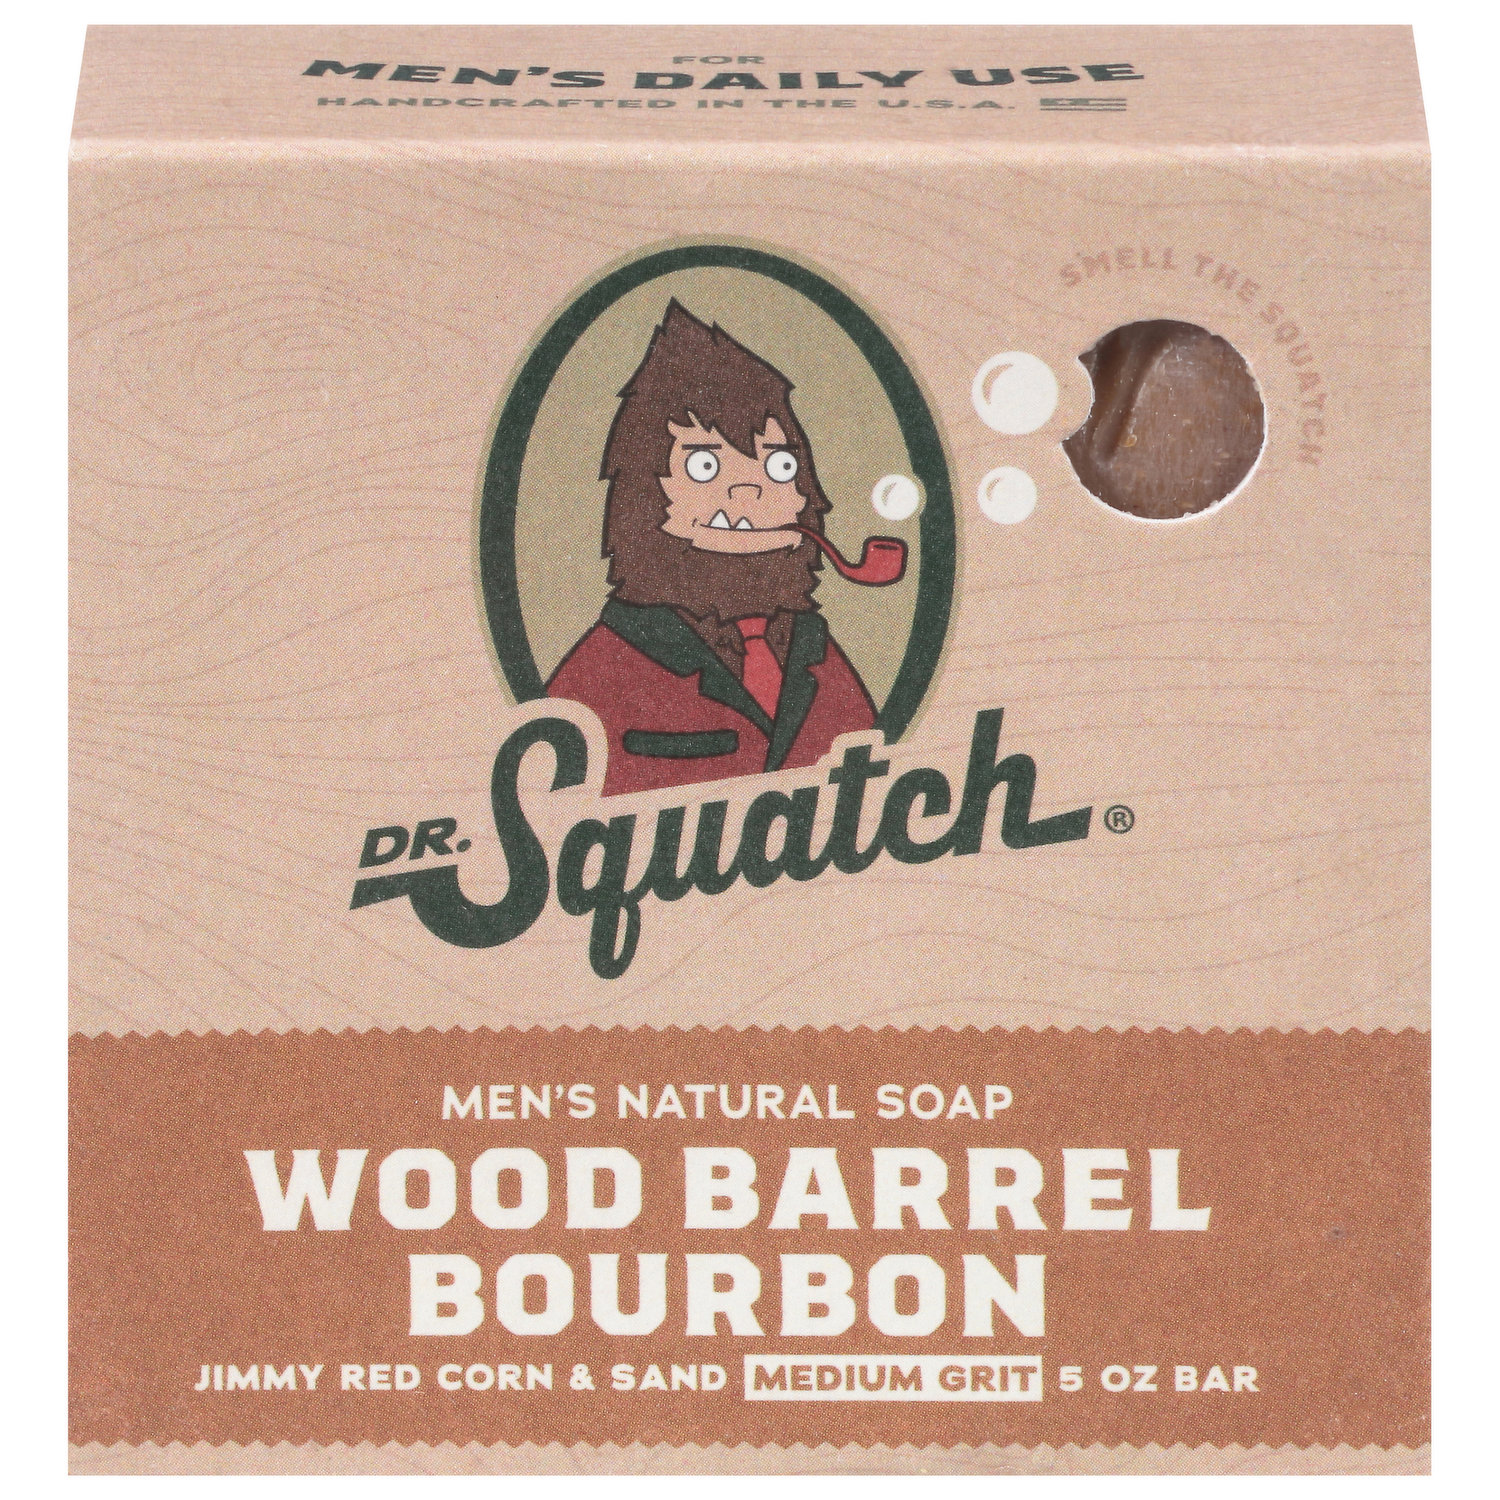 This is the doctor squash wood barrel, bourbon bar soap I only use bar, Dr. Squatch Soap